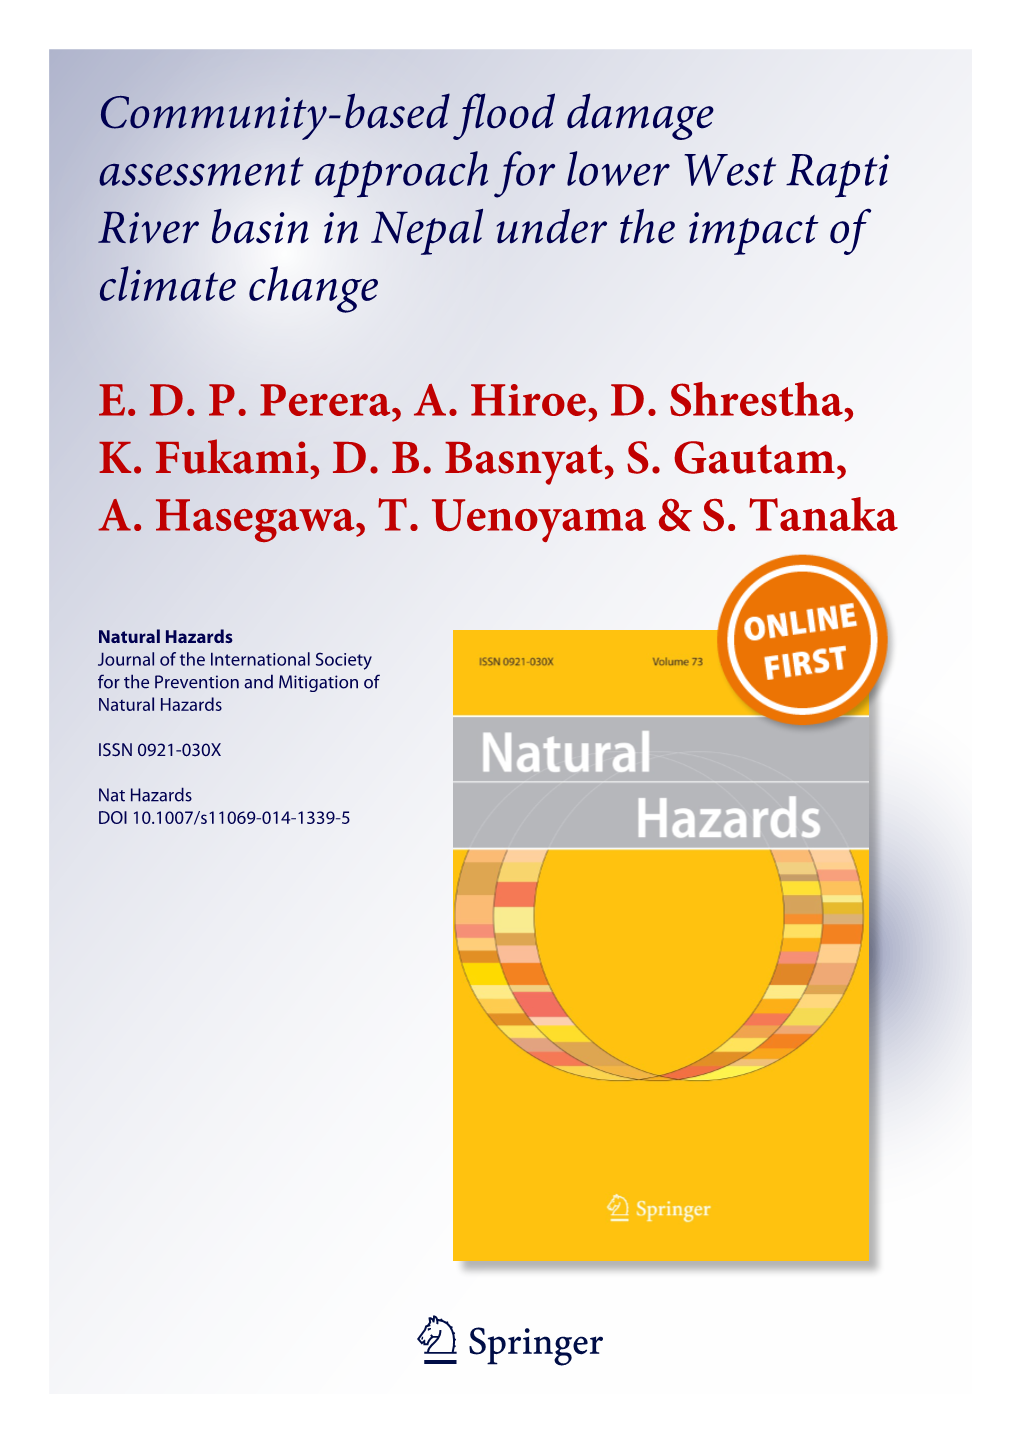 Community-Based Flood Damage Assessment Approach for Lower West Rapti River Basin in Nepal Under the Impact of Climate Change